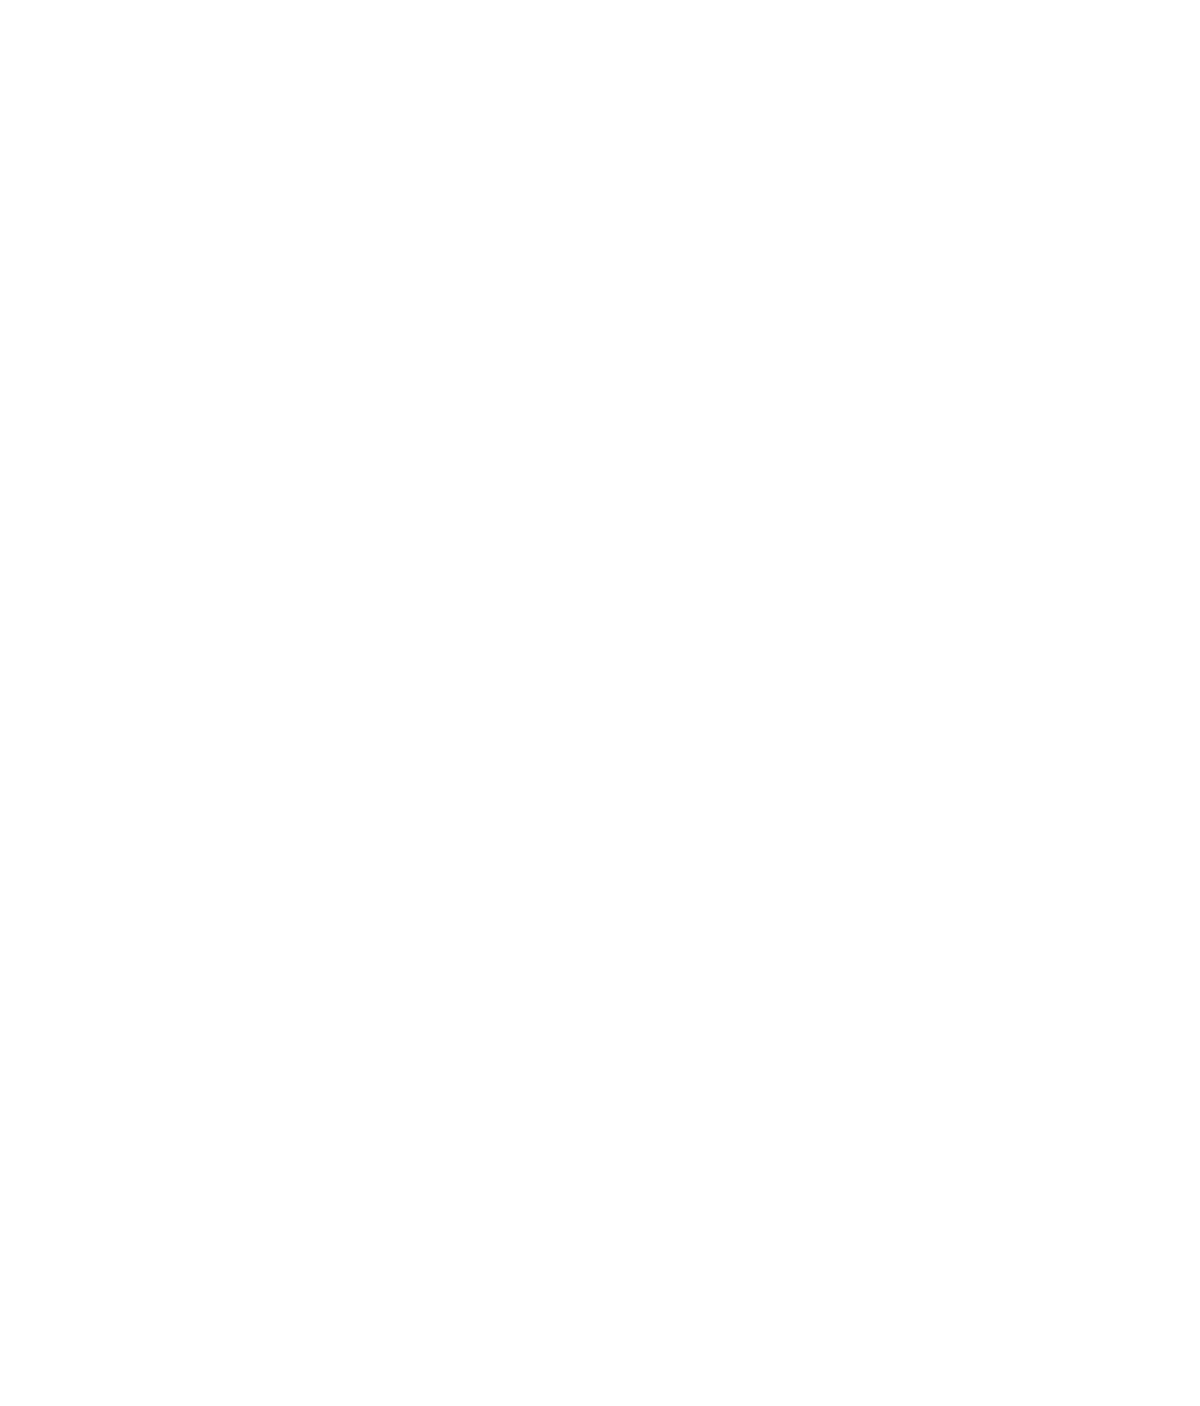 Logotyp för UNHCR - United Nations High Commissioner for Refugees